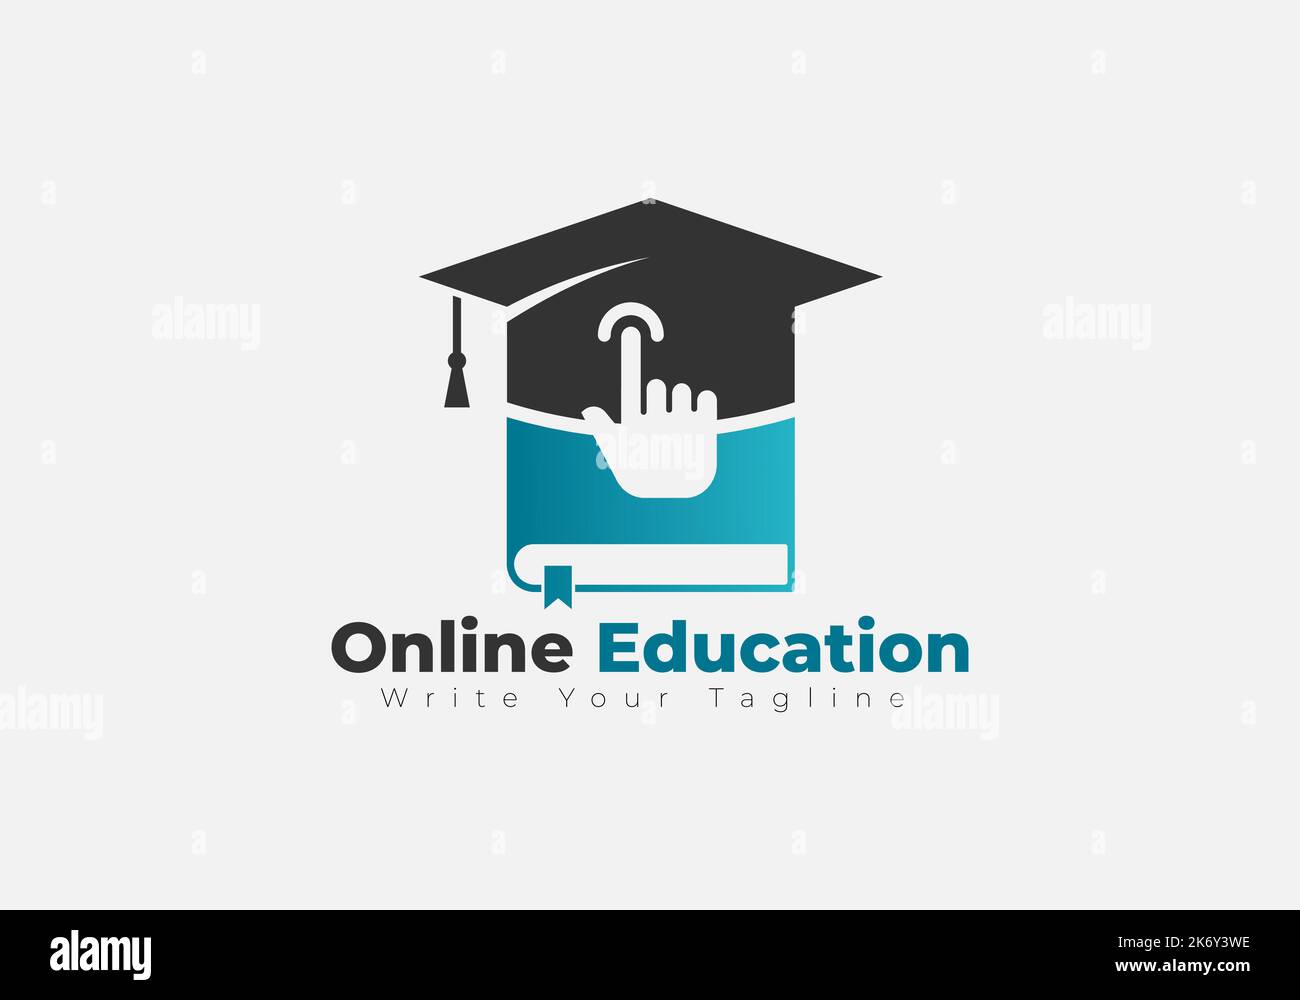 Education logo Stock Vector Images - Alamy